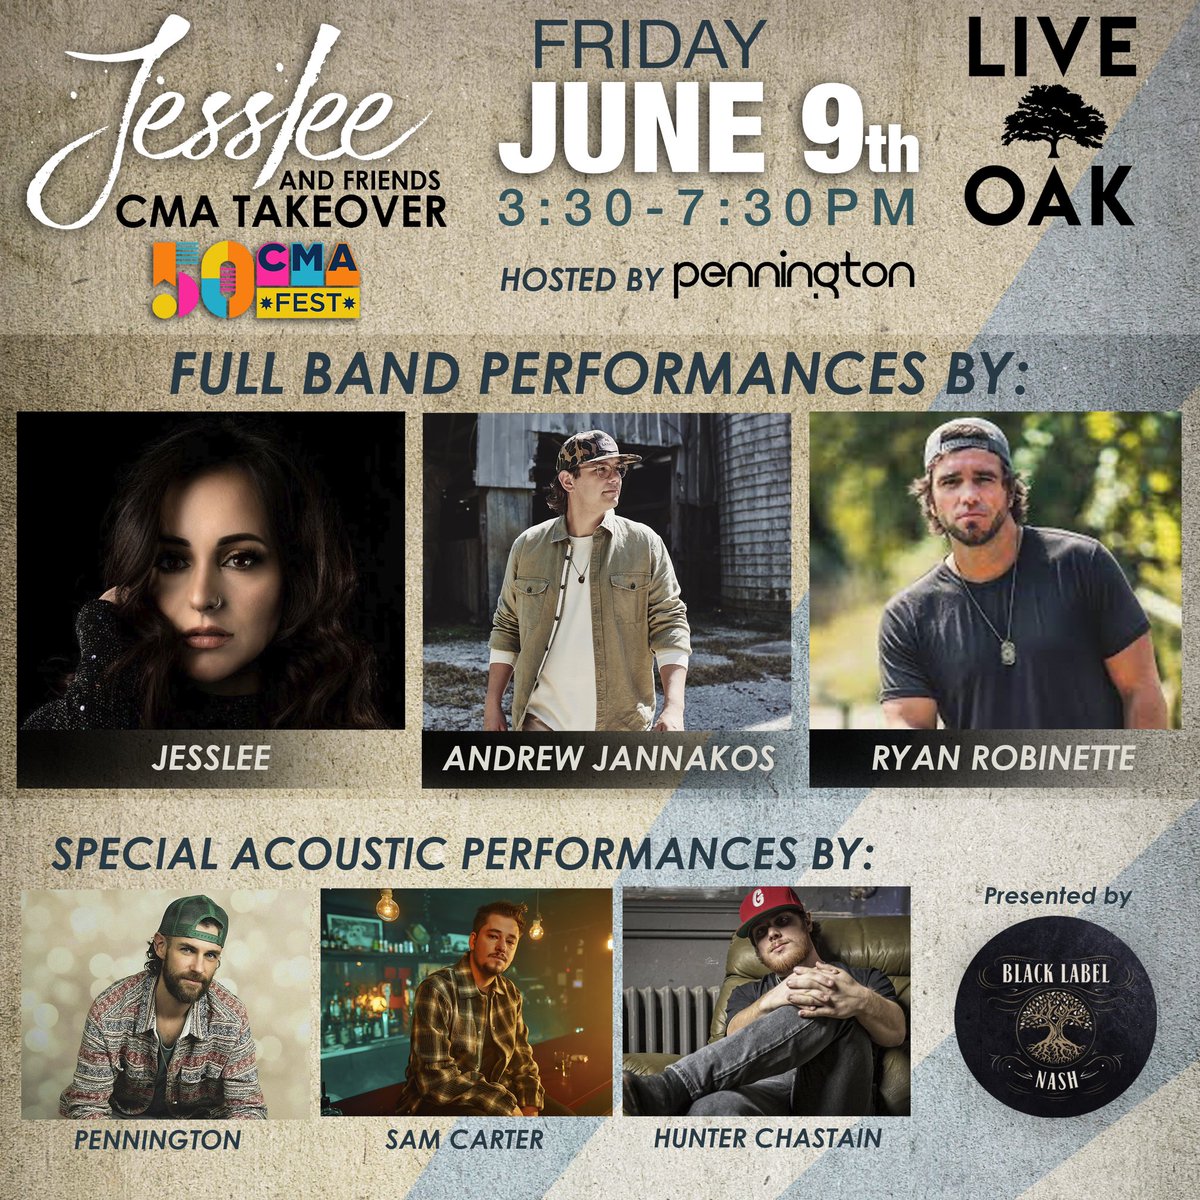 Y’all, I am so stoked to be kickin’ off this years 50th #CMA with @blacklabelnash & friends🔥
Come join the fun June 9th at @live_oak_nashville for all the fun and this amazing line up🎶 @CountryMusic 

(more artists TBA)
#cmafest #countrymusic #livemusicrocks